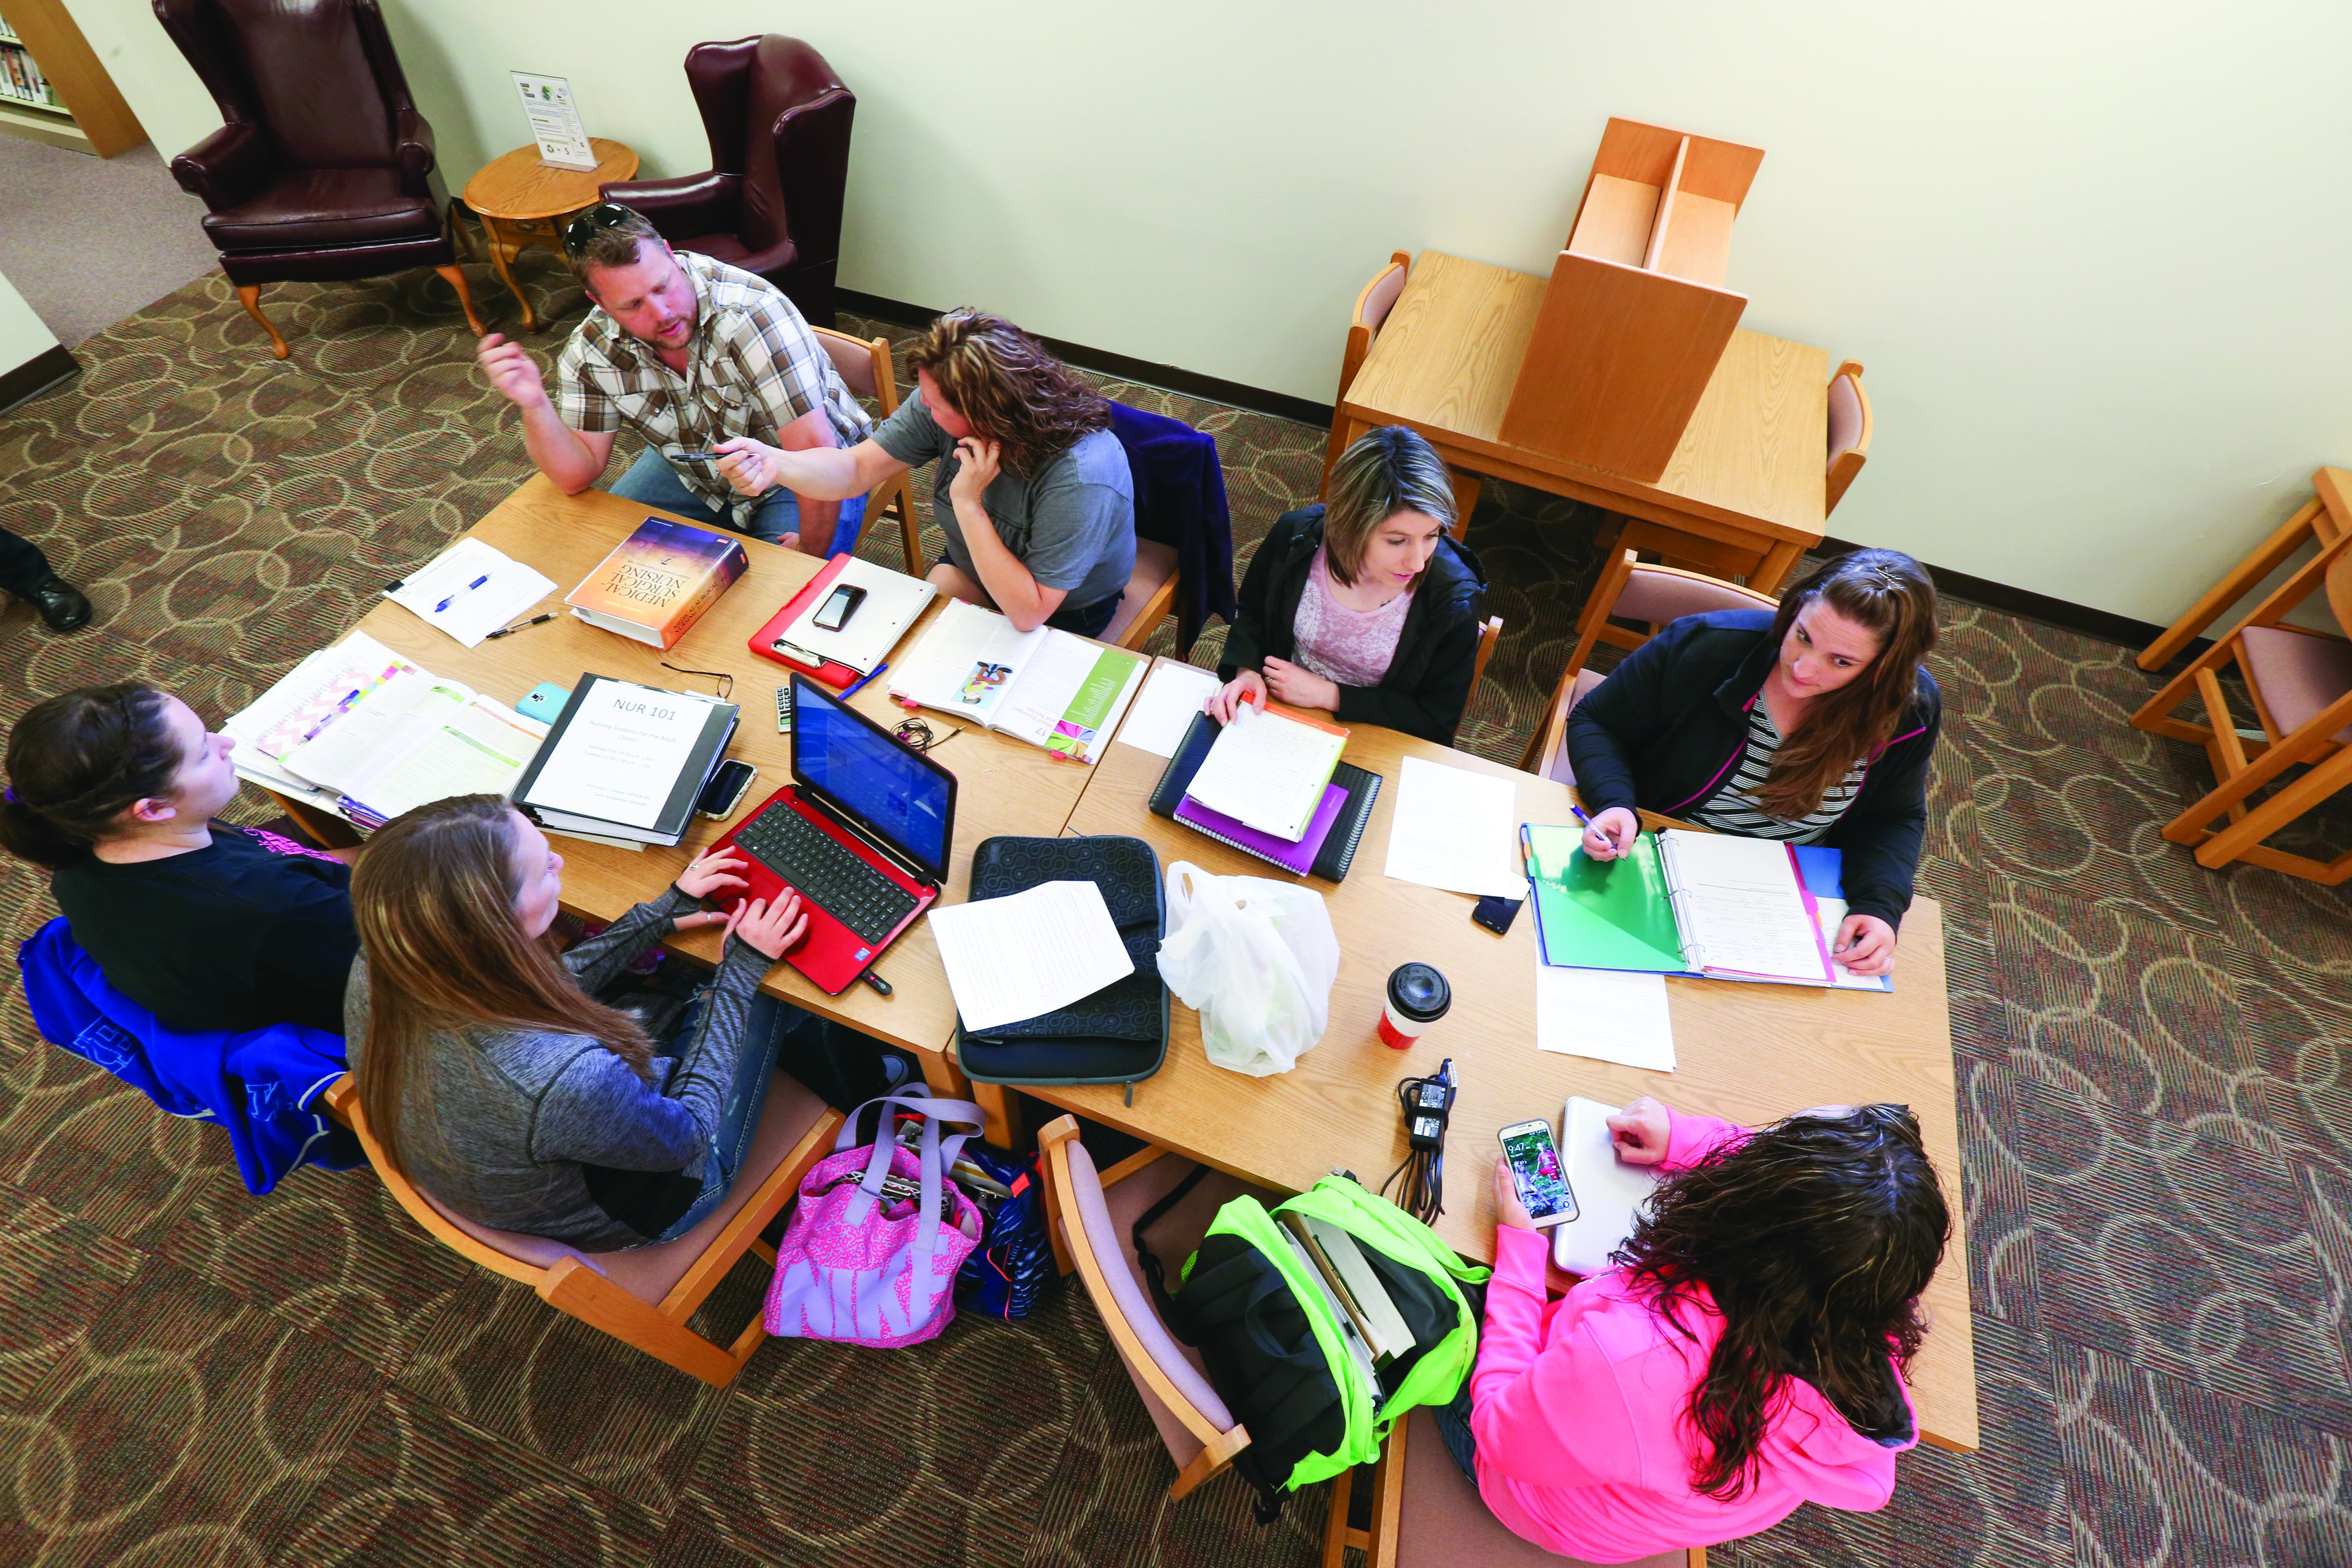 Students studying at the Garnett Library